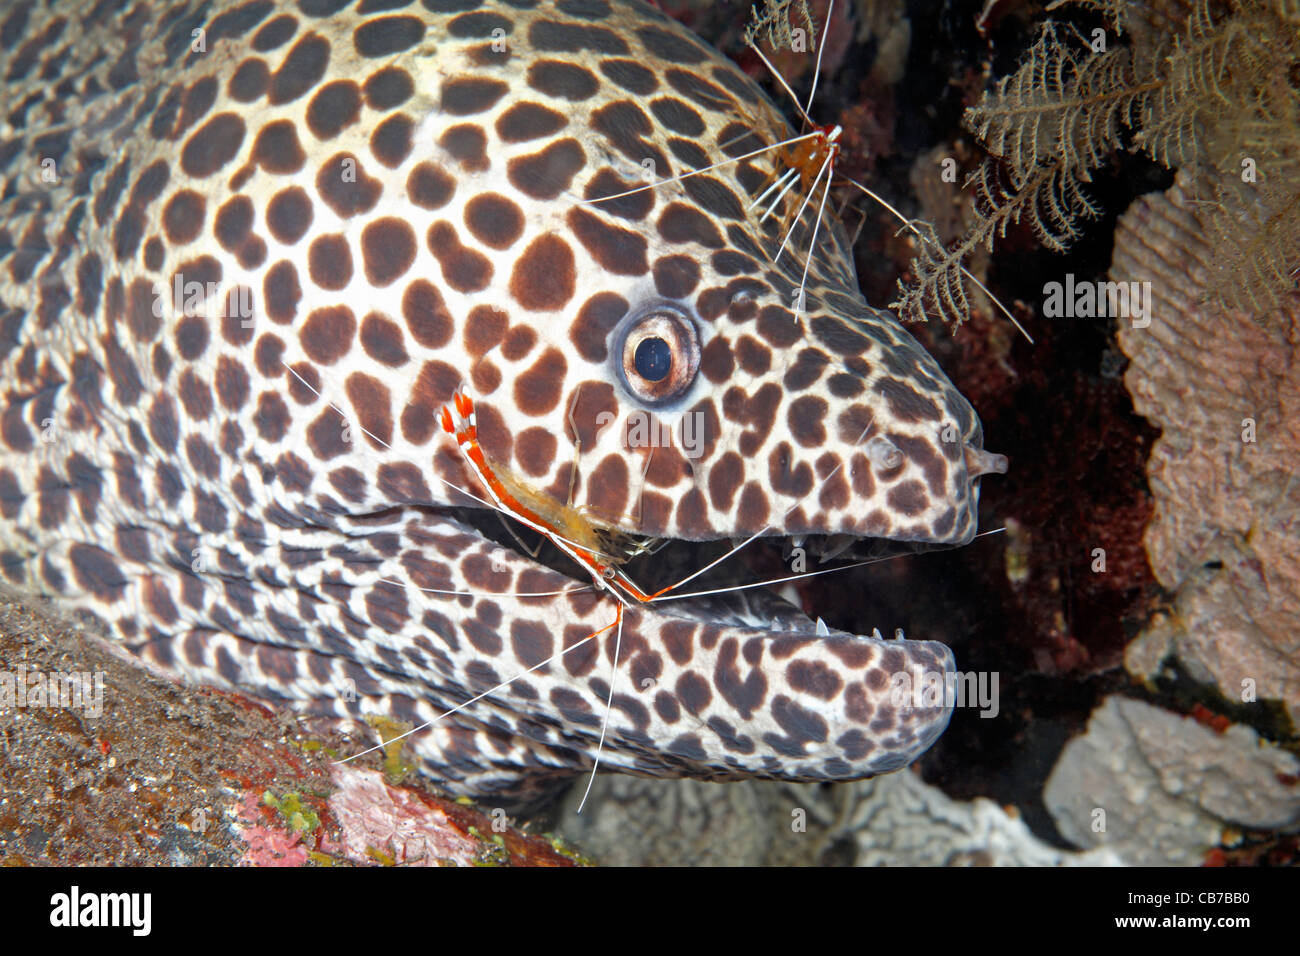 A Honeycomb, or Leopard moray eel, Gymnothorax favagineus, with two Cleaner Shrimp, Lysmata amboinensis on the mouth and head Stock Photo